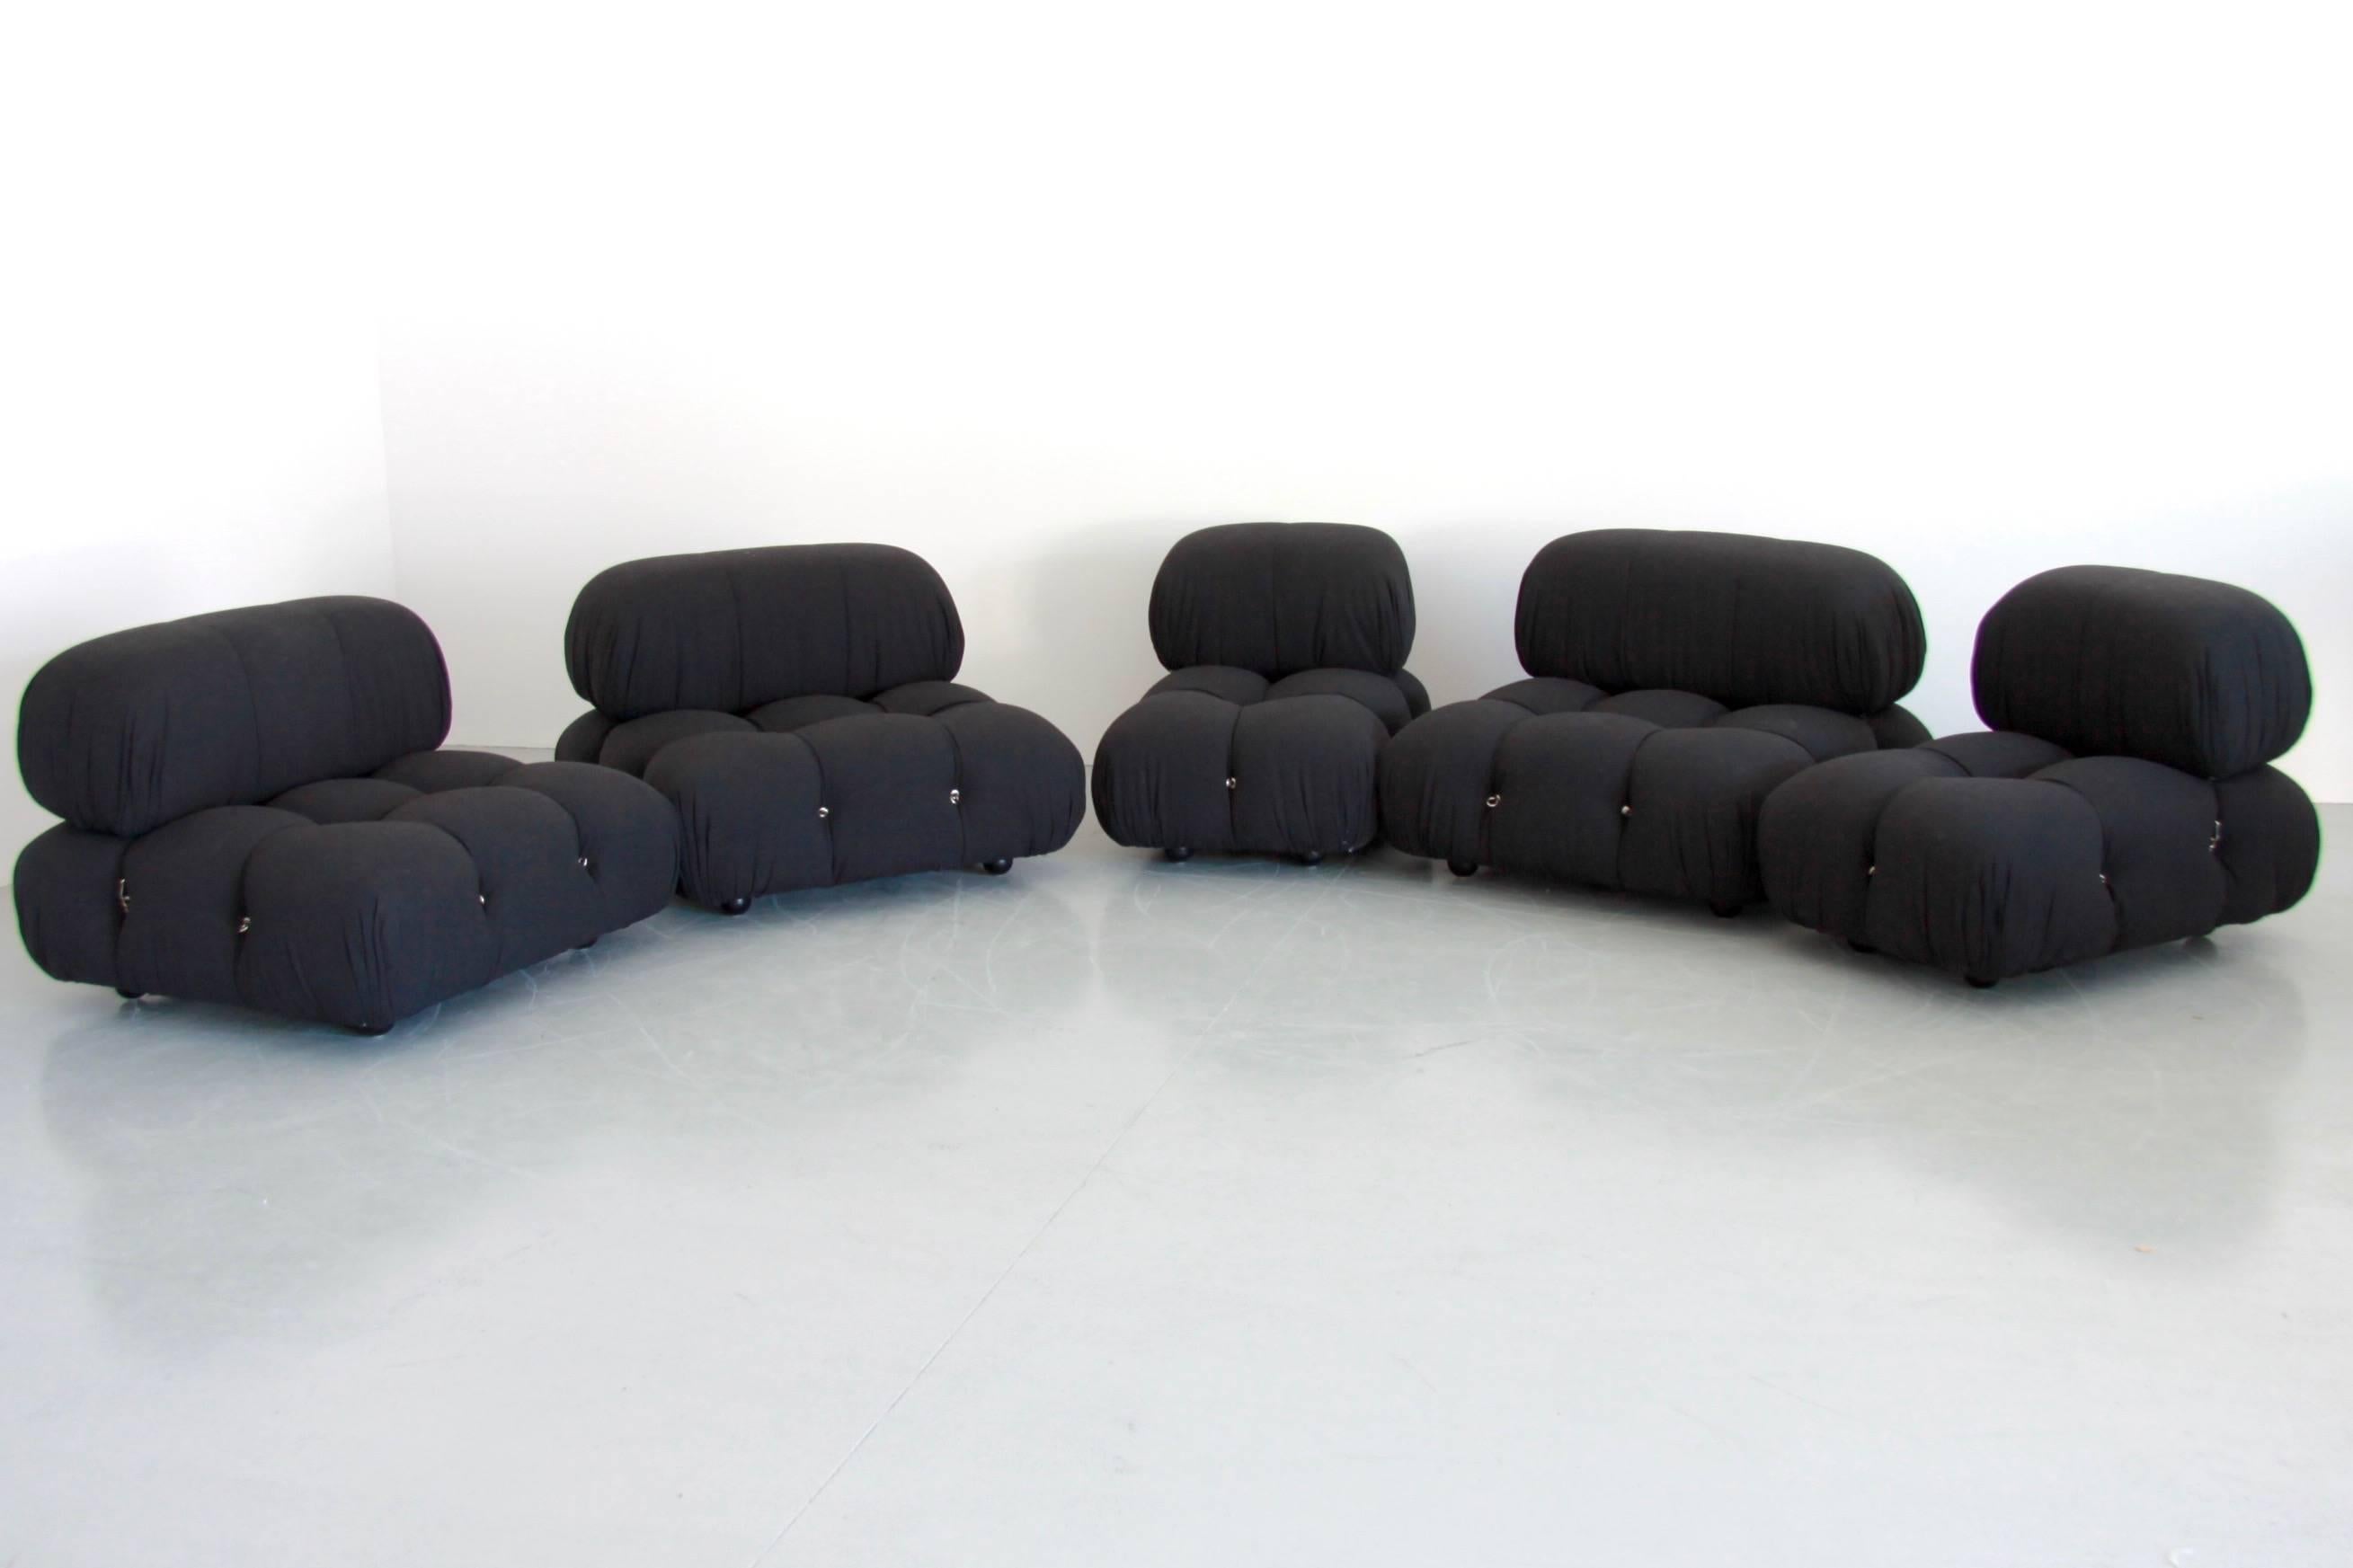 This modular living room sofa was designed by Mario Bellini in 1971 and was manufactured by B&B Italia. Every sectional element of this sofa can be used freely and apart from one another. The backs are provided with rings and carabiners, which